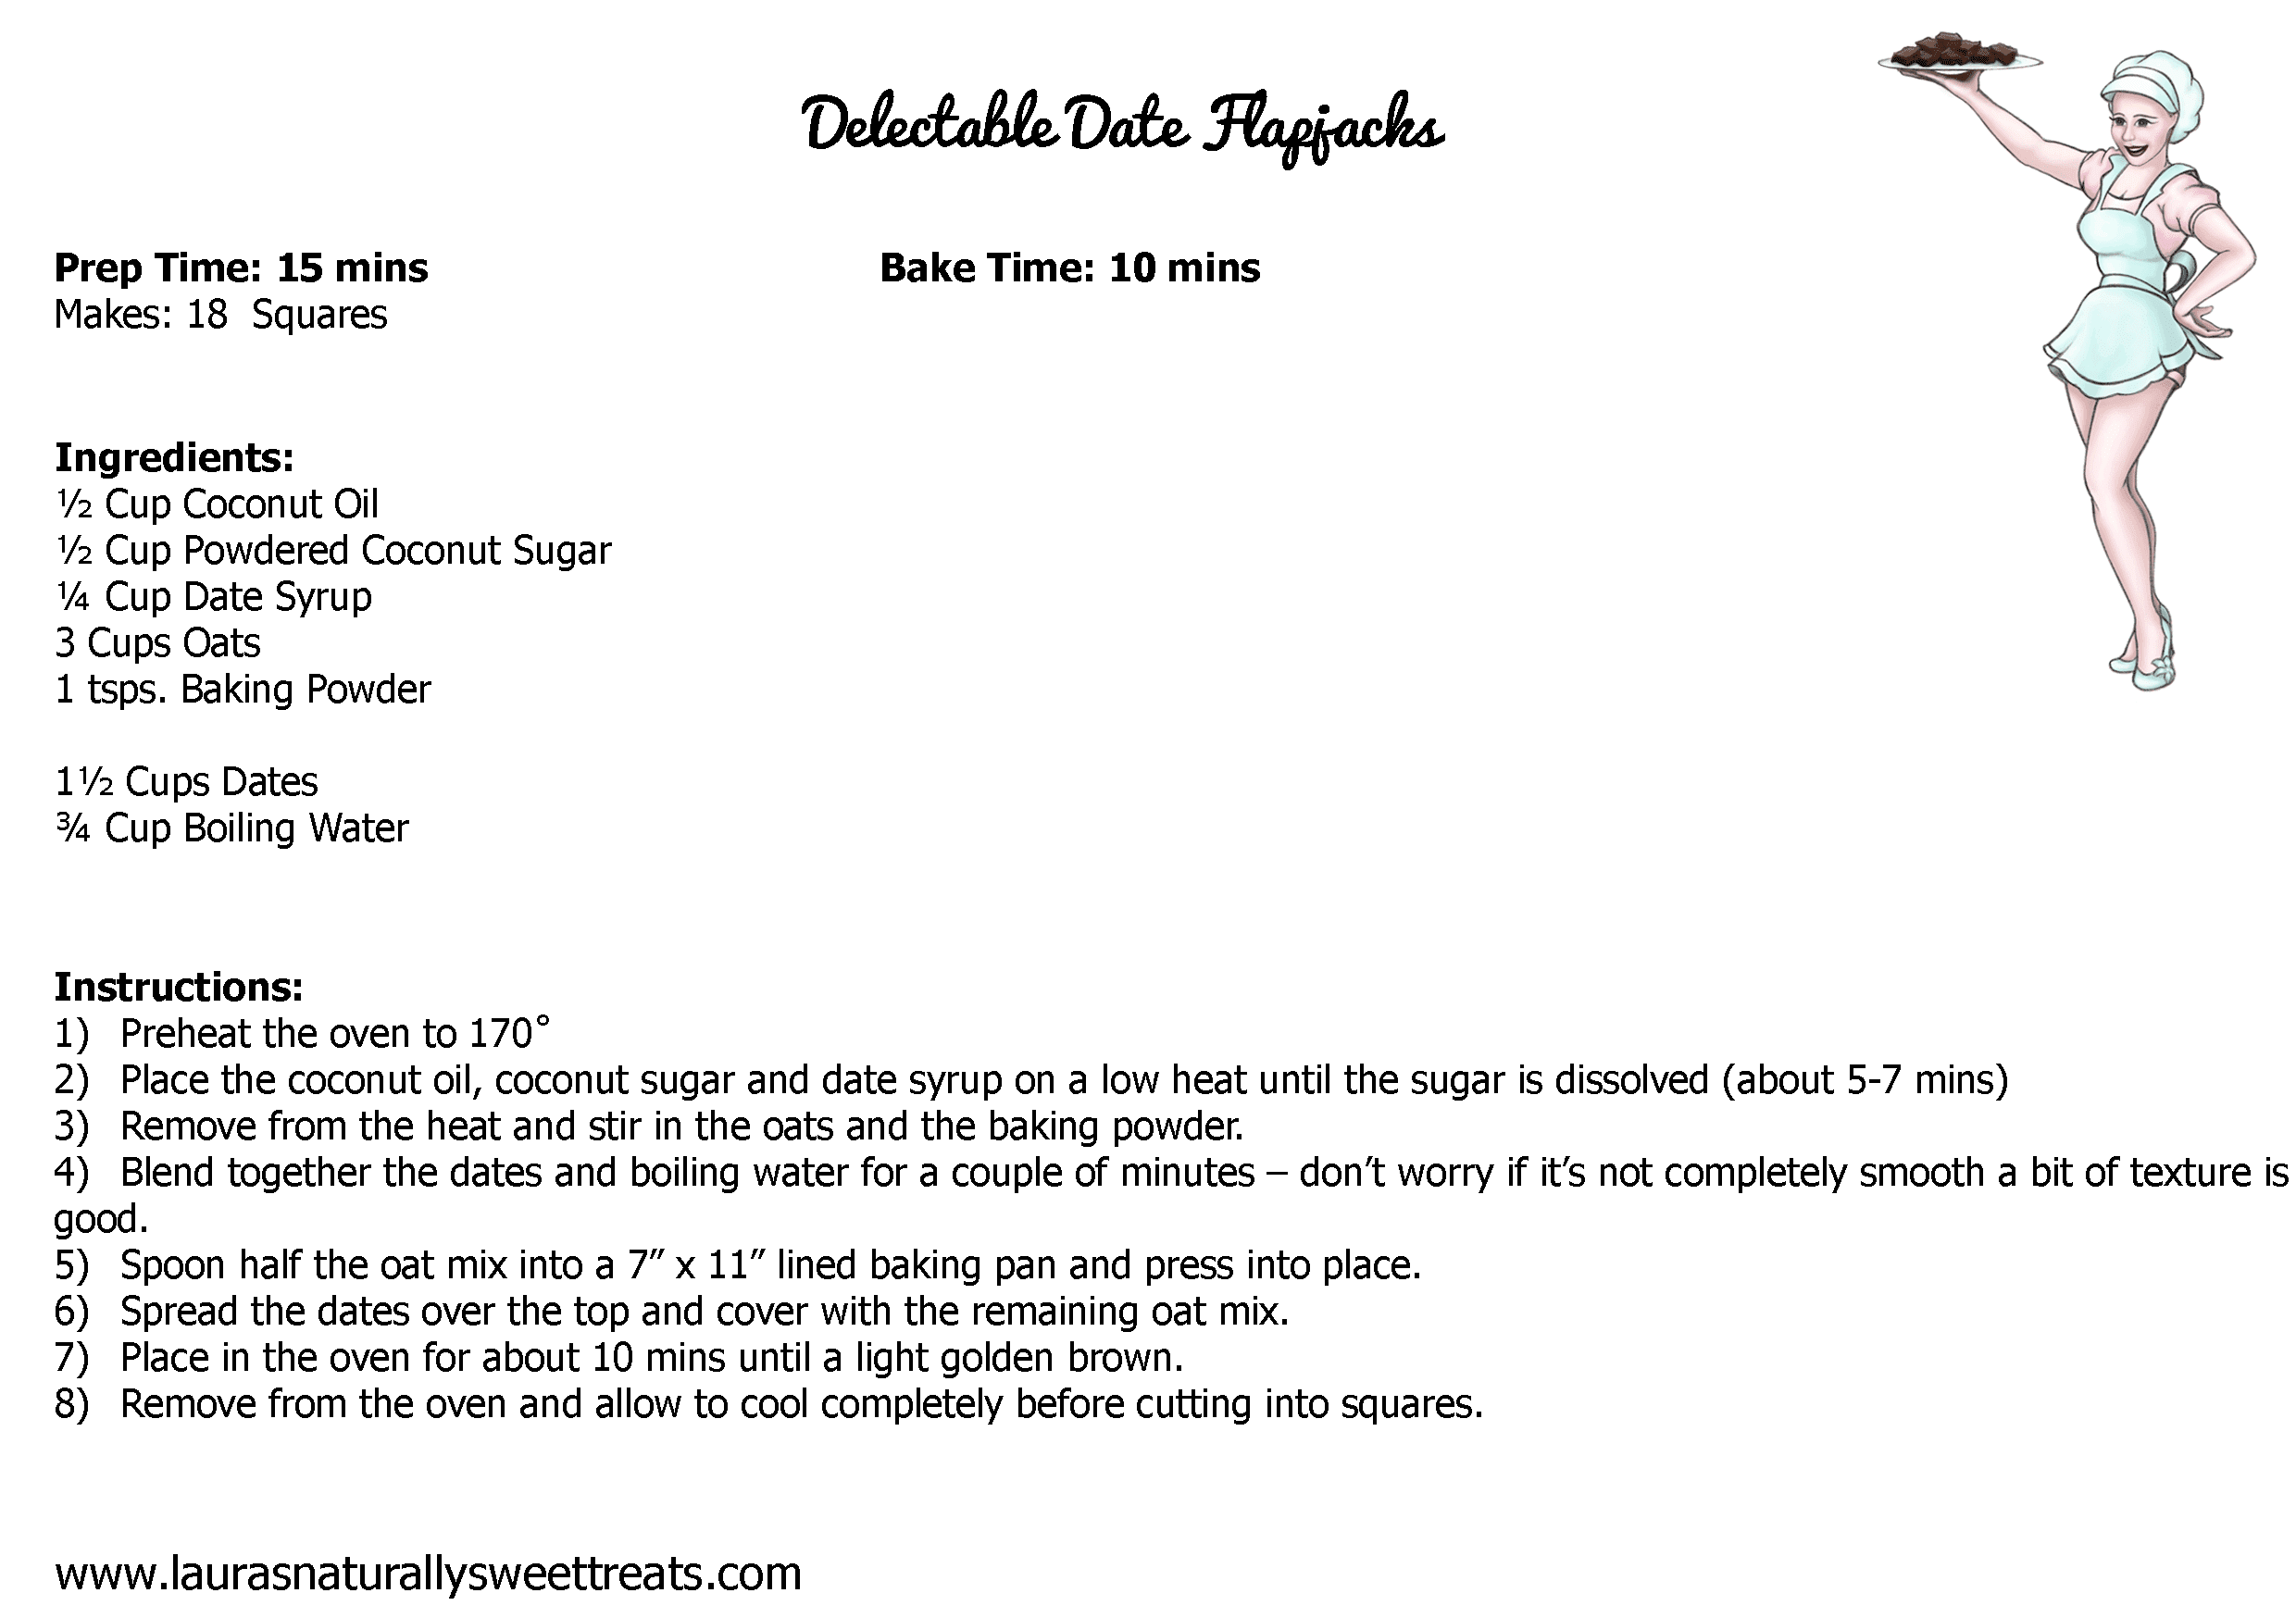 delectable date flapjacks recipe card